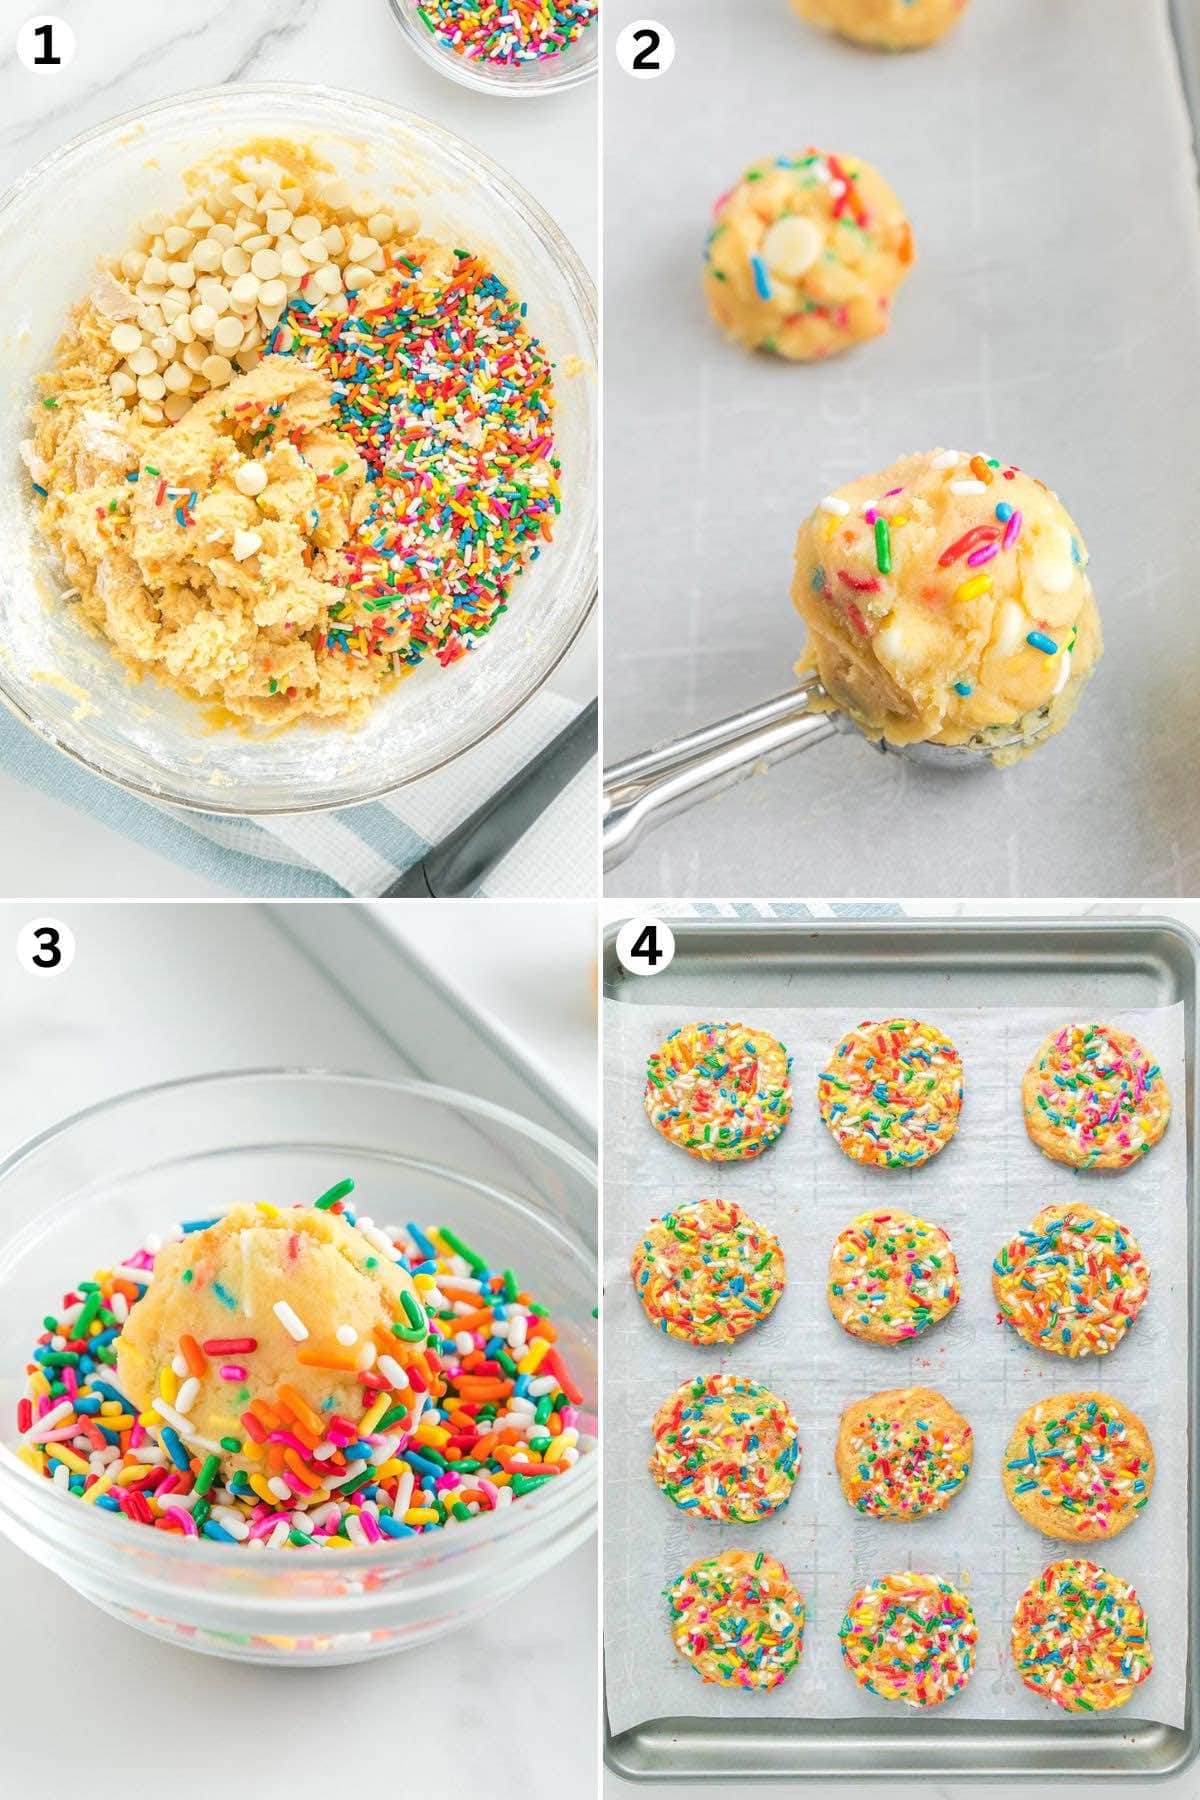 In a mixing bowl, combine all the ingredients and mix. Scoop each cookie and roll in the palms of your hands. Roll each cookie ball into the sprinkles. Place the cookie on the baking sheet and bake.